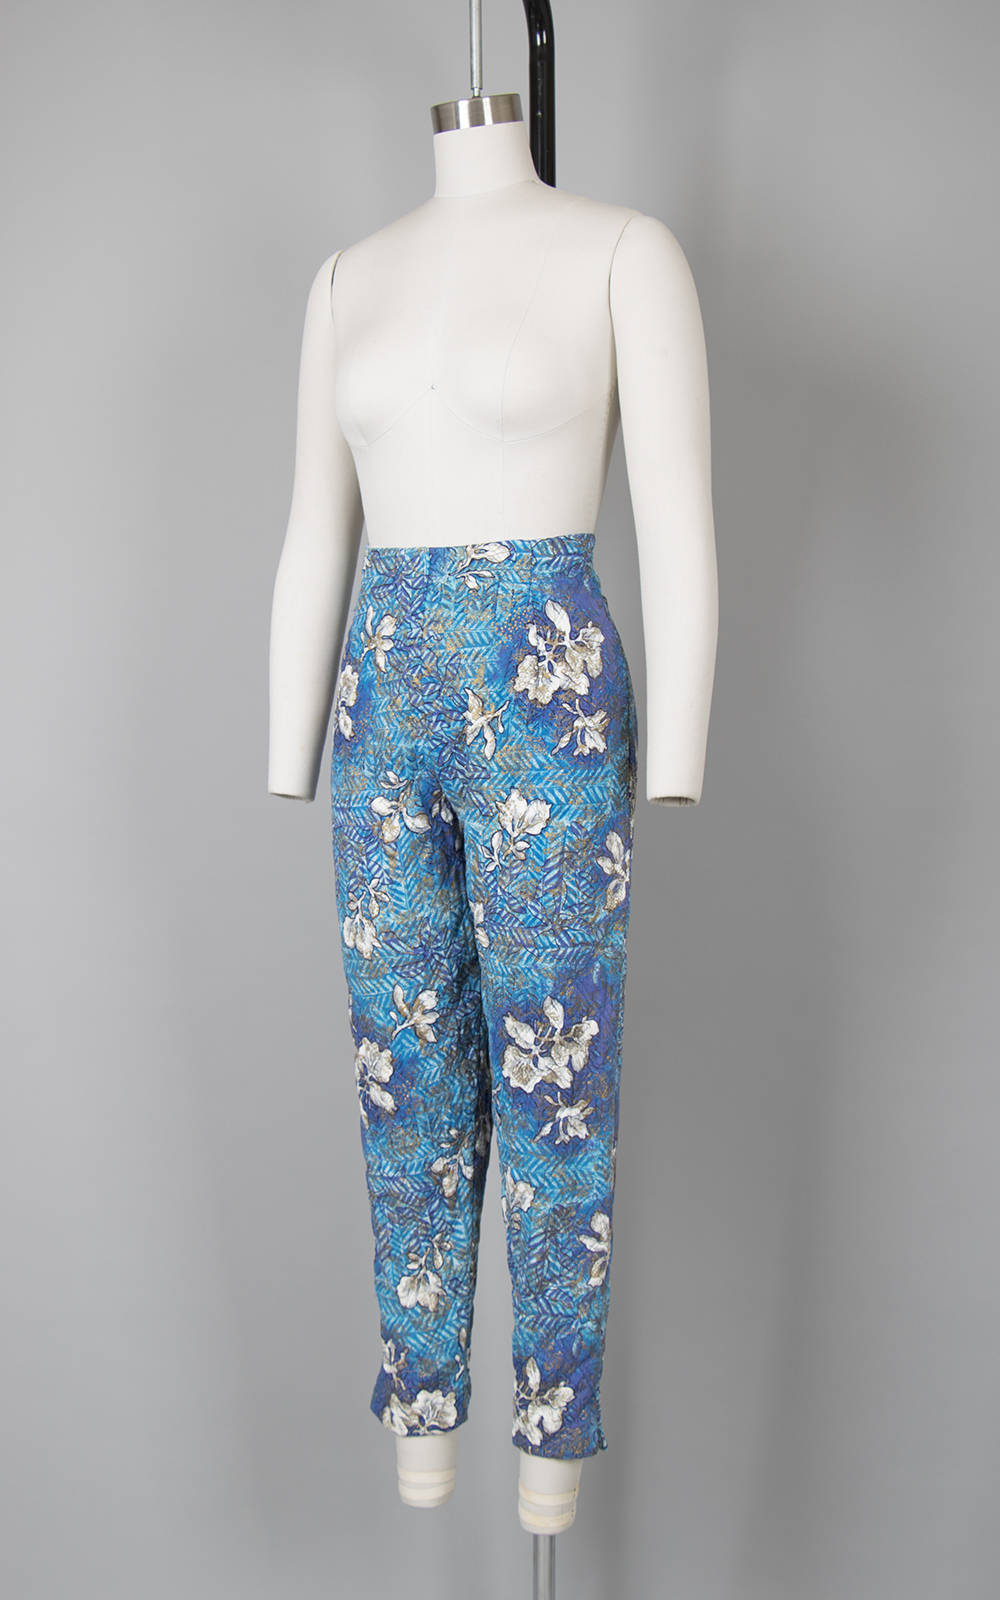 Vintage 1950s Capris | 50s Quilted Hawaiian Floral Print Cotton Blue Metallic Gold High Waisted Pants (small)